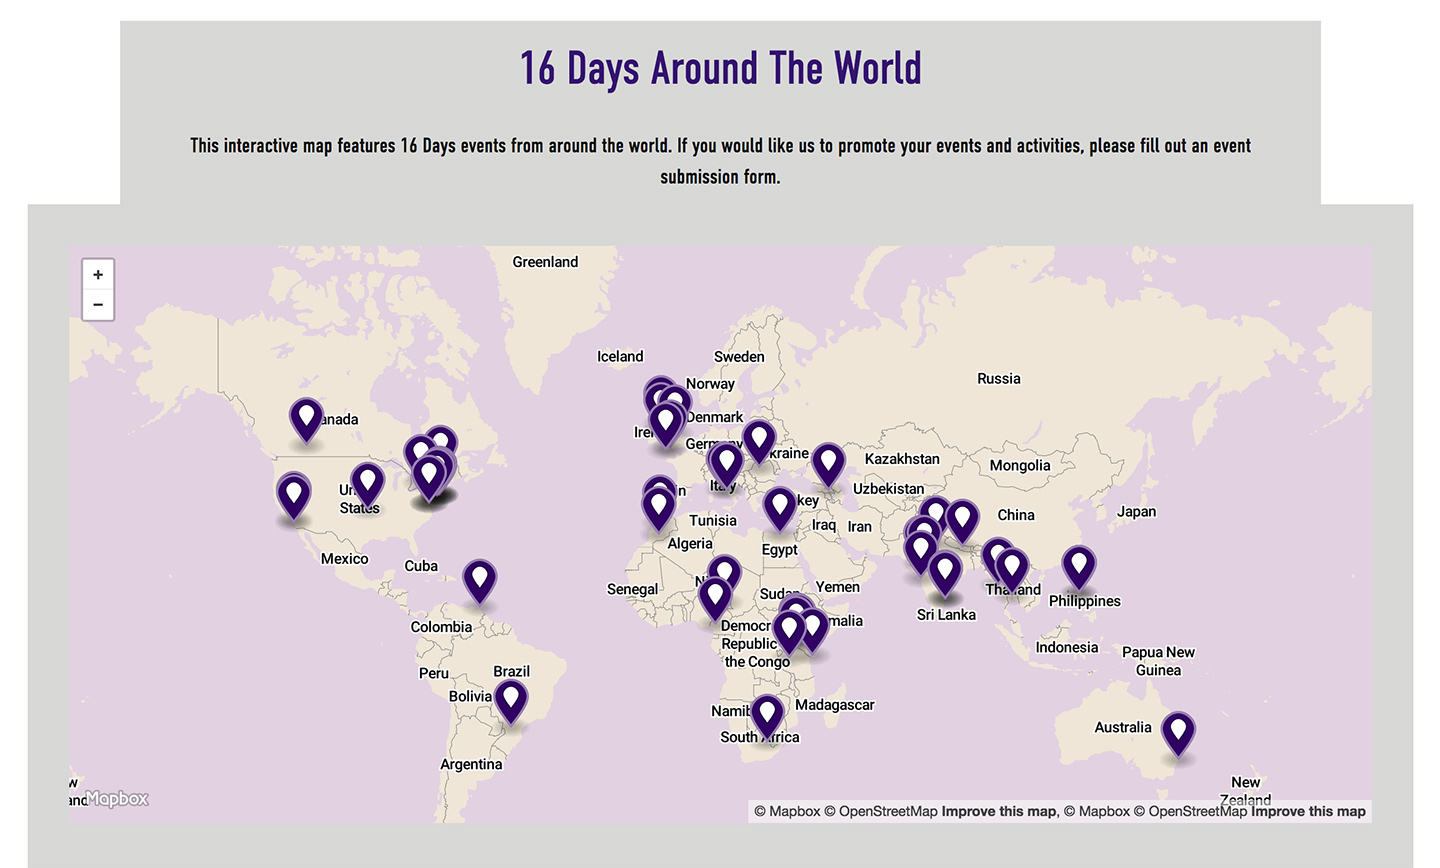 Center for Women’s Global Leadership at Rutger’s University: 16 Days Campaign: Dynamic Interactive Map